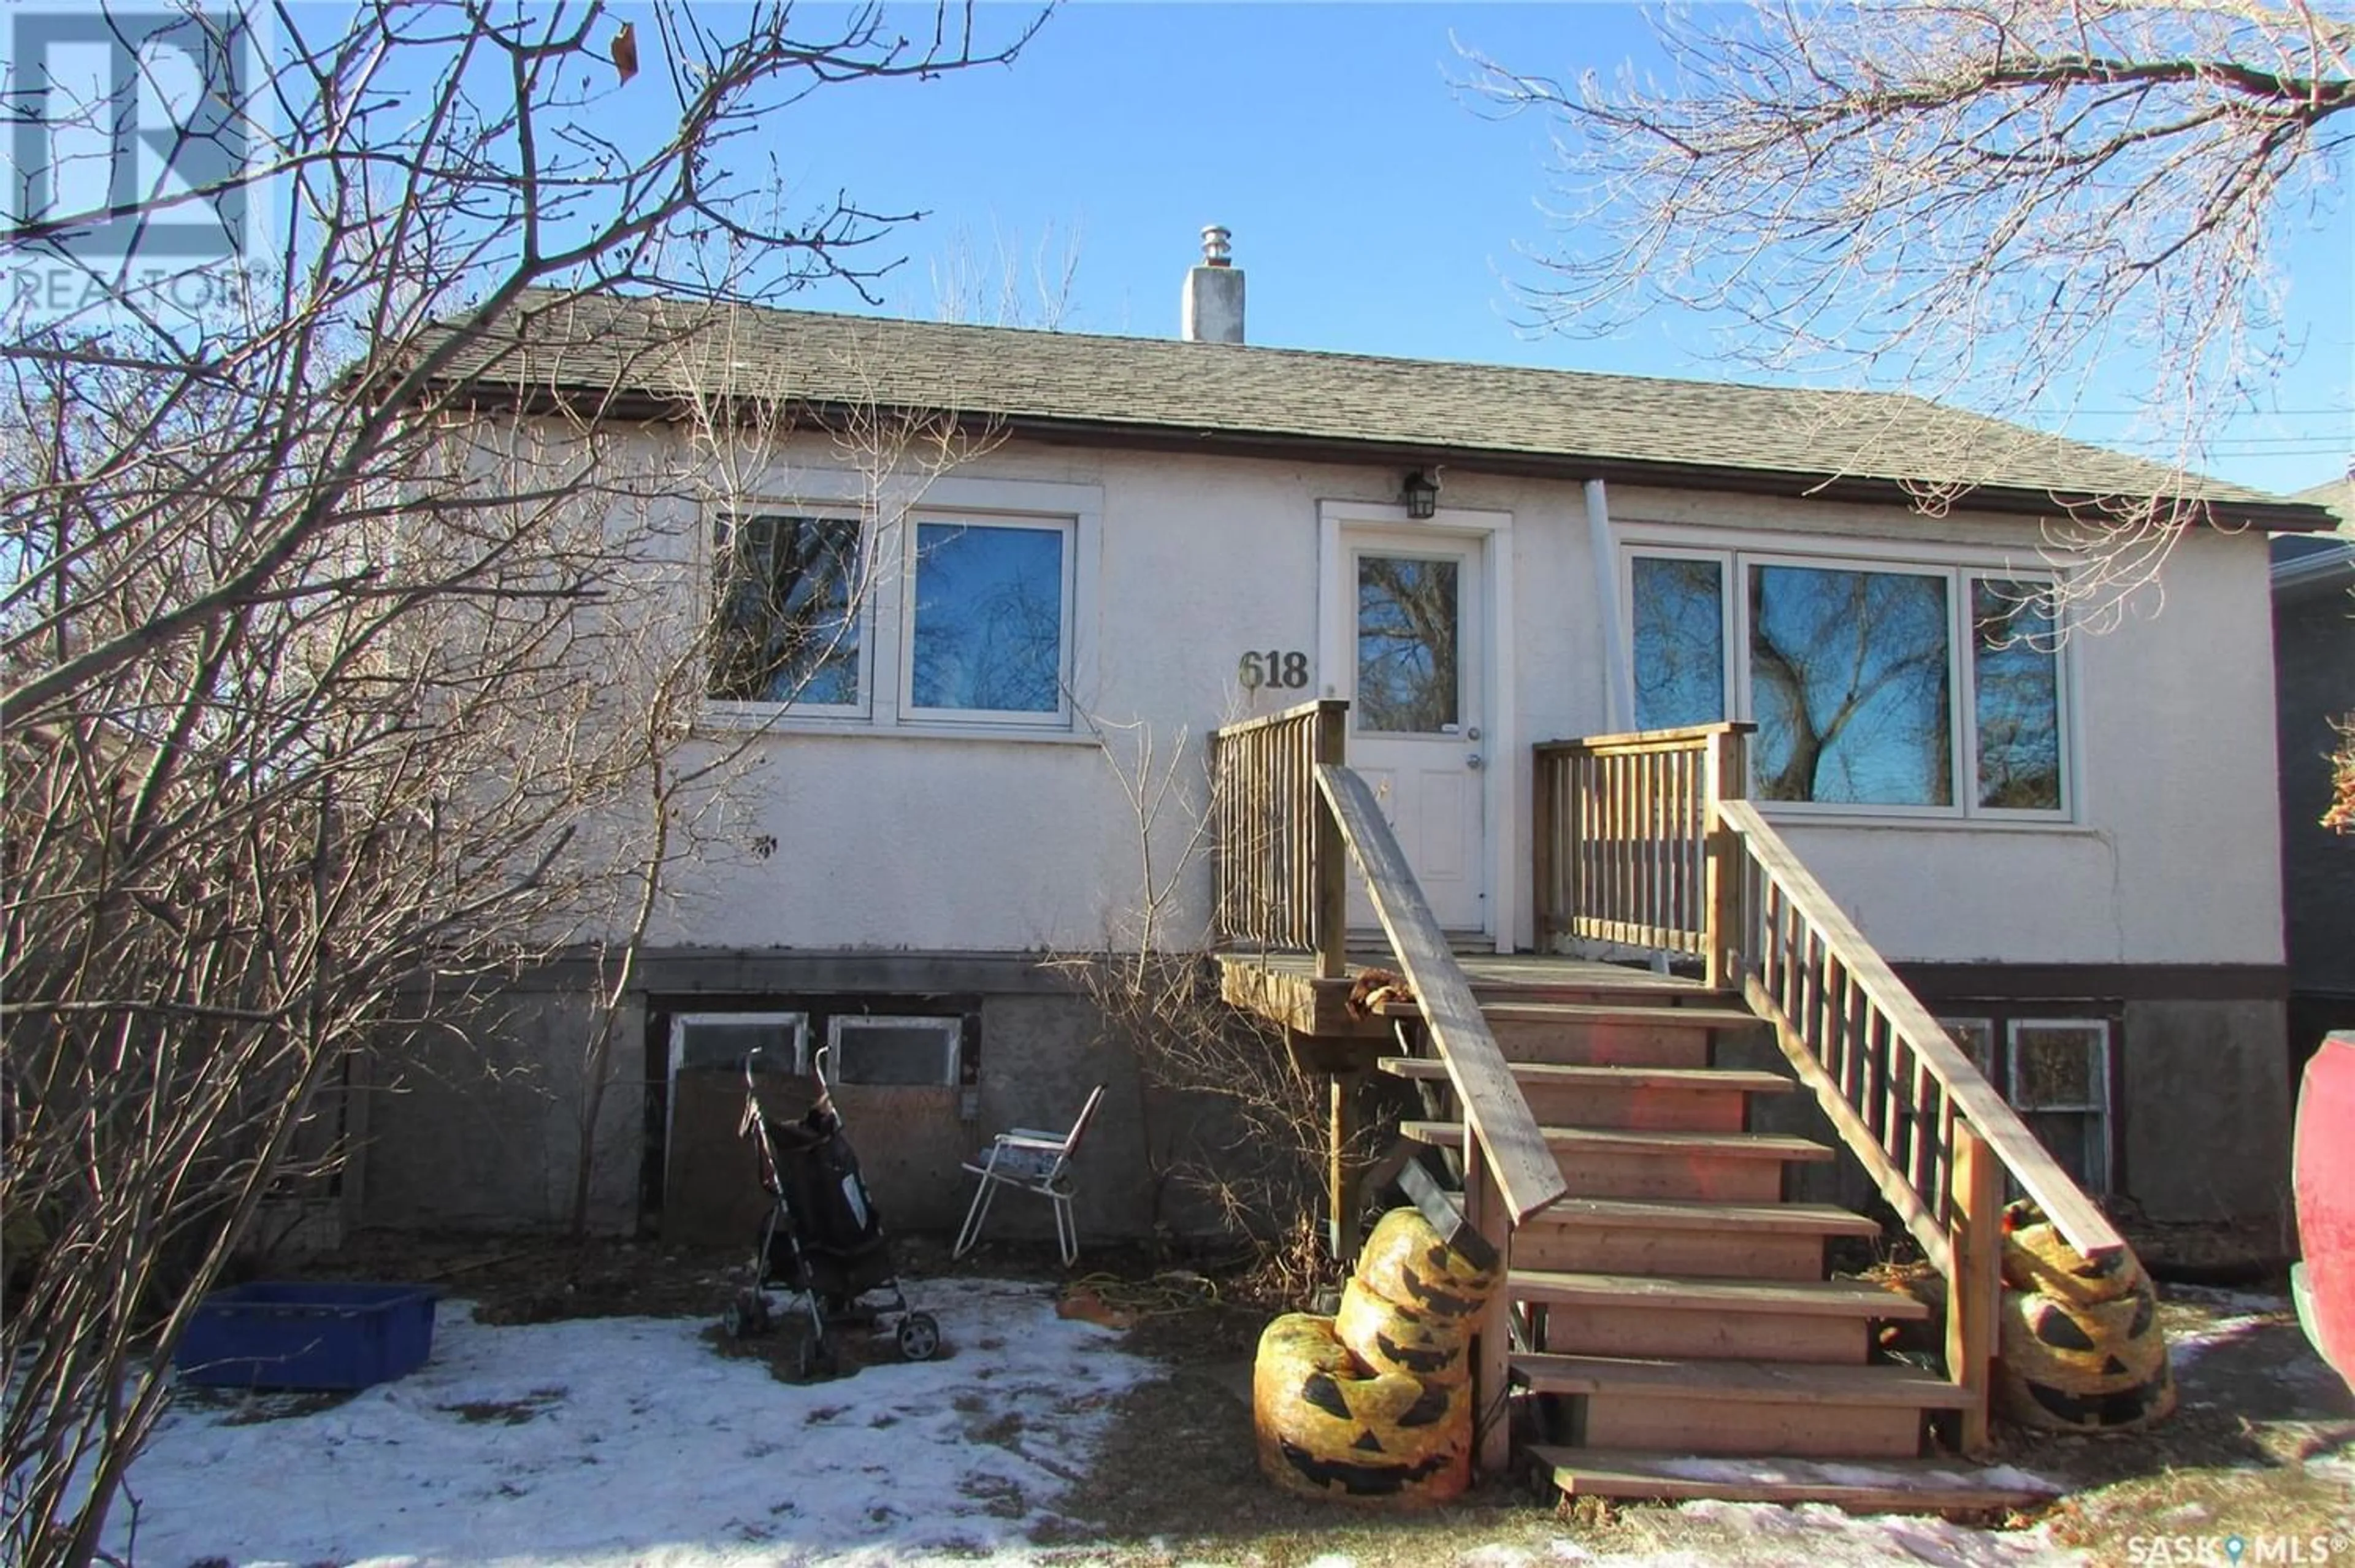 A pic from exterior of the house or condo for 618 Wascana STREET, Regina Saskatchewan S4T4H3